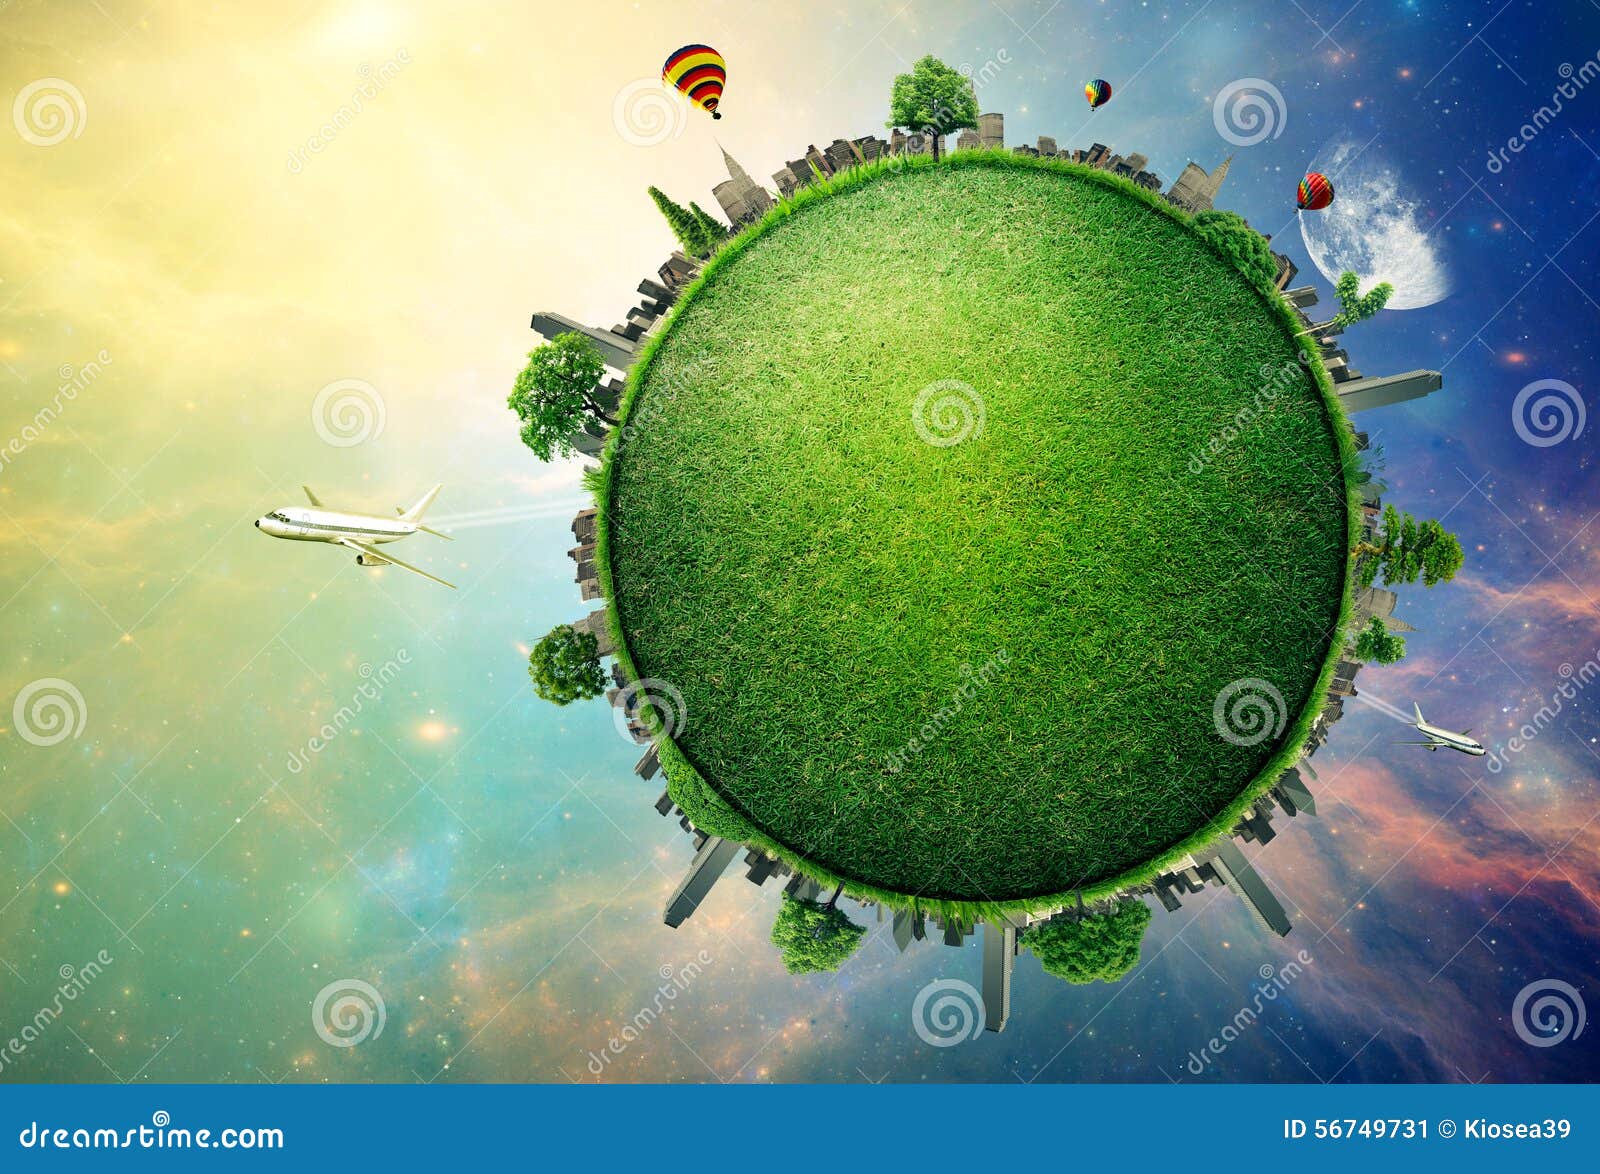 green planet earth covered with grass city skyline